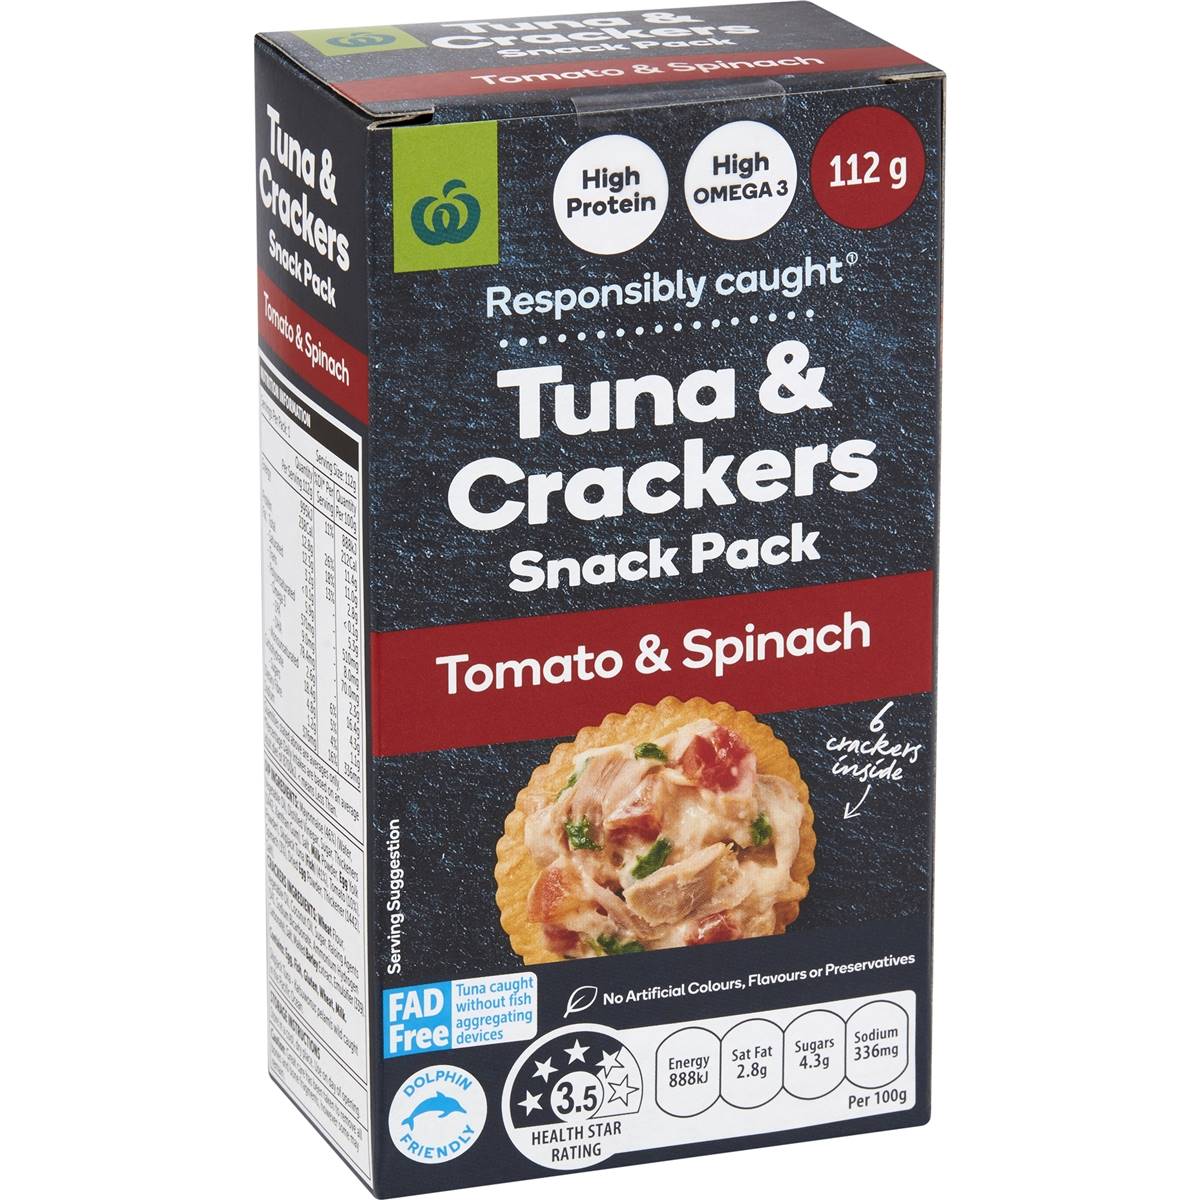 Calories in Woolworths Tuna & Crackers Snack Pack Tomato & Spinach